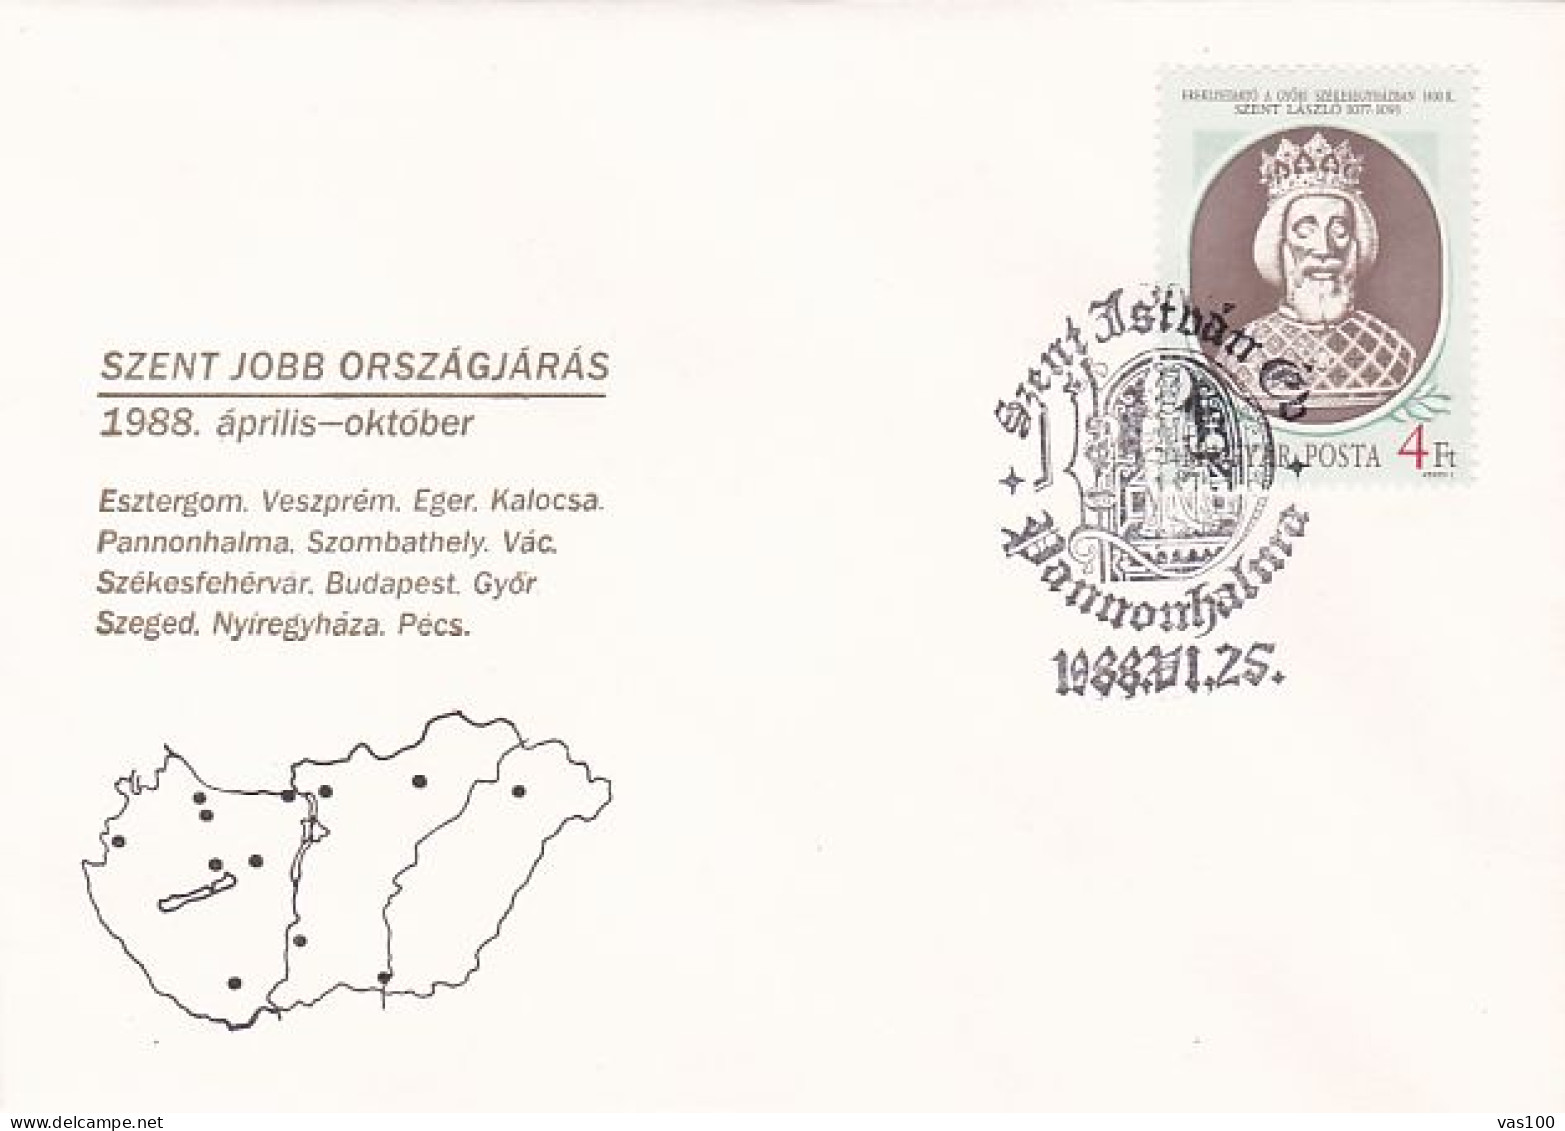 ST STEPHEN ROUTE THROUGH PANNONIAN PLAIN, MAP, SPECIAL COVER, 1988, HUNGARY - Cartas & Documentos